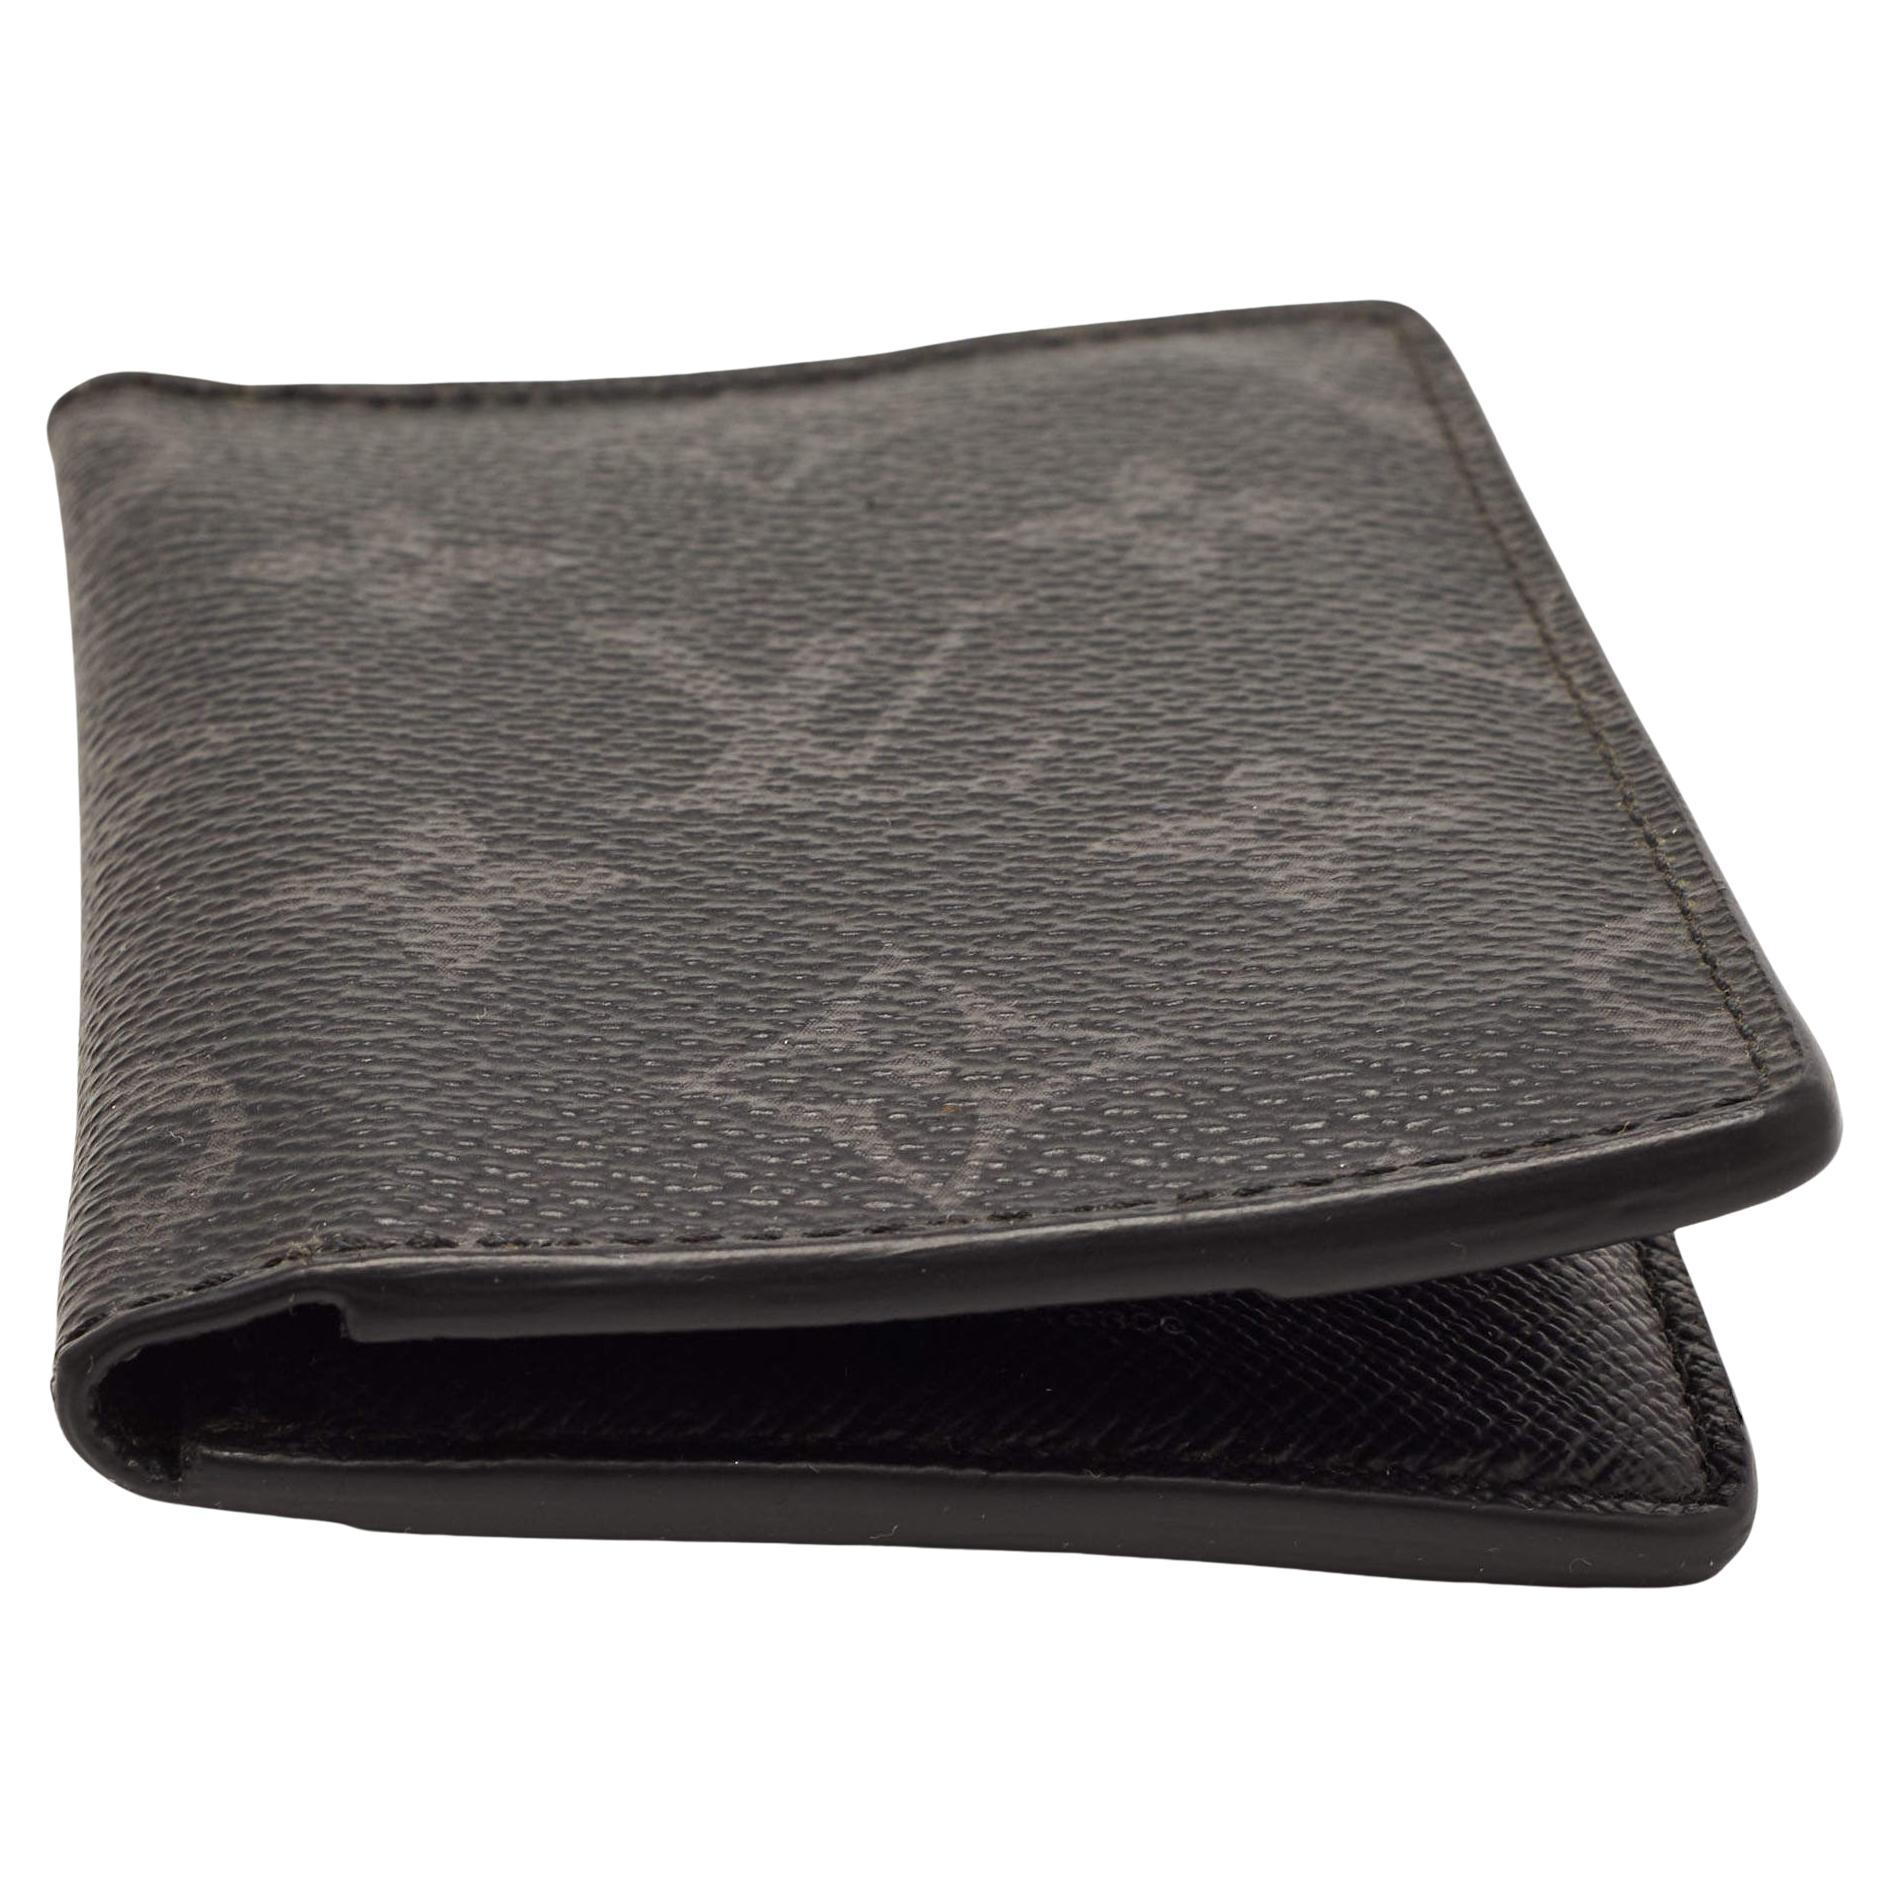 This classy LV wallet for men brings along a touch of luxury and immense style. It comes perfectly crafted to neatly carry your cards and cash.

Includes: Original Dustbag, Original Box

